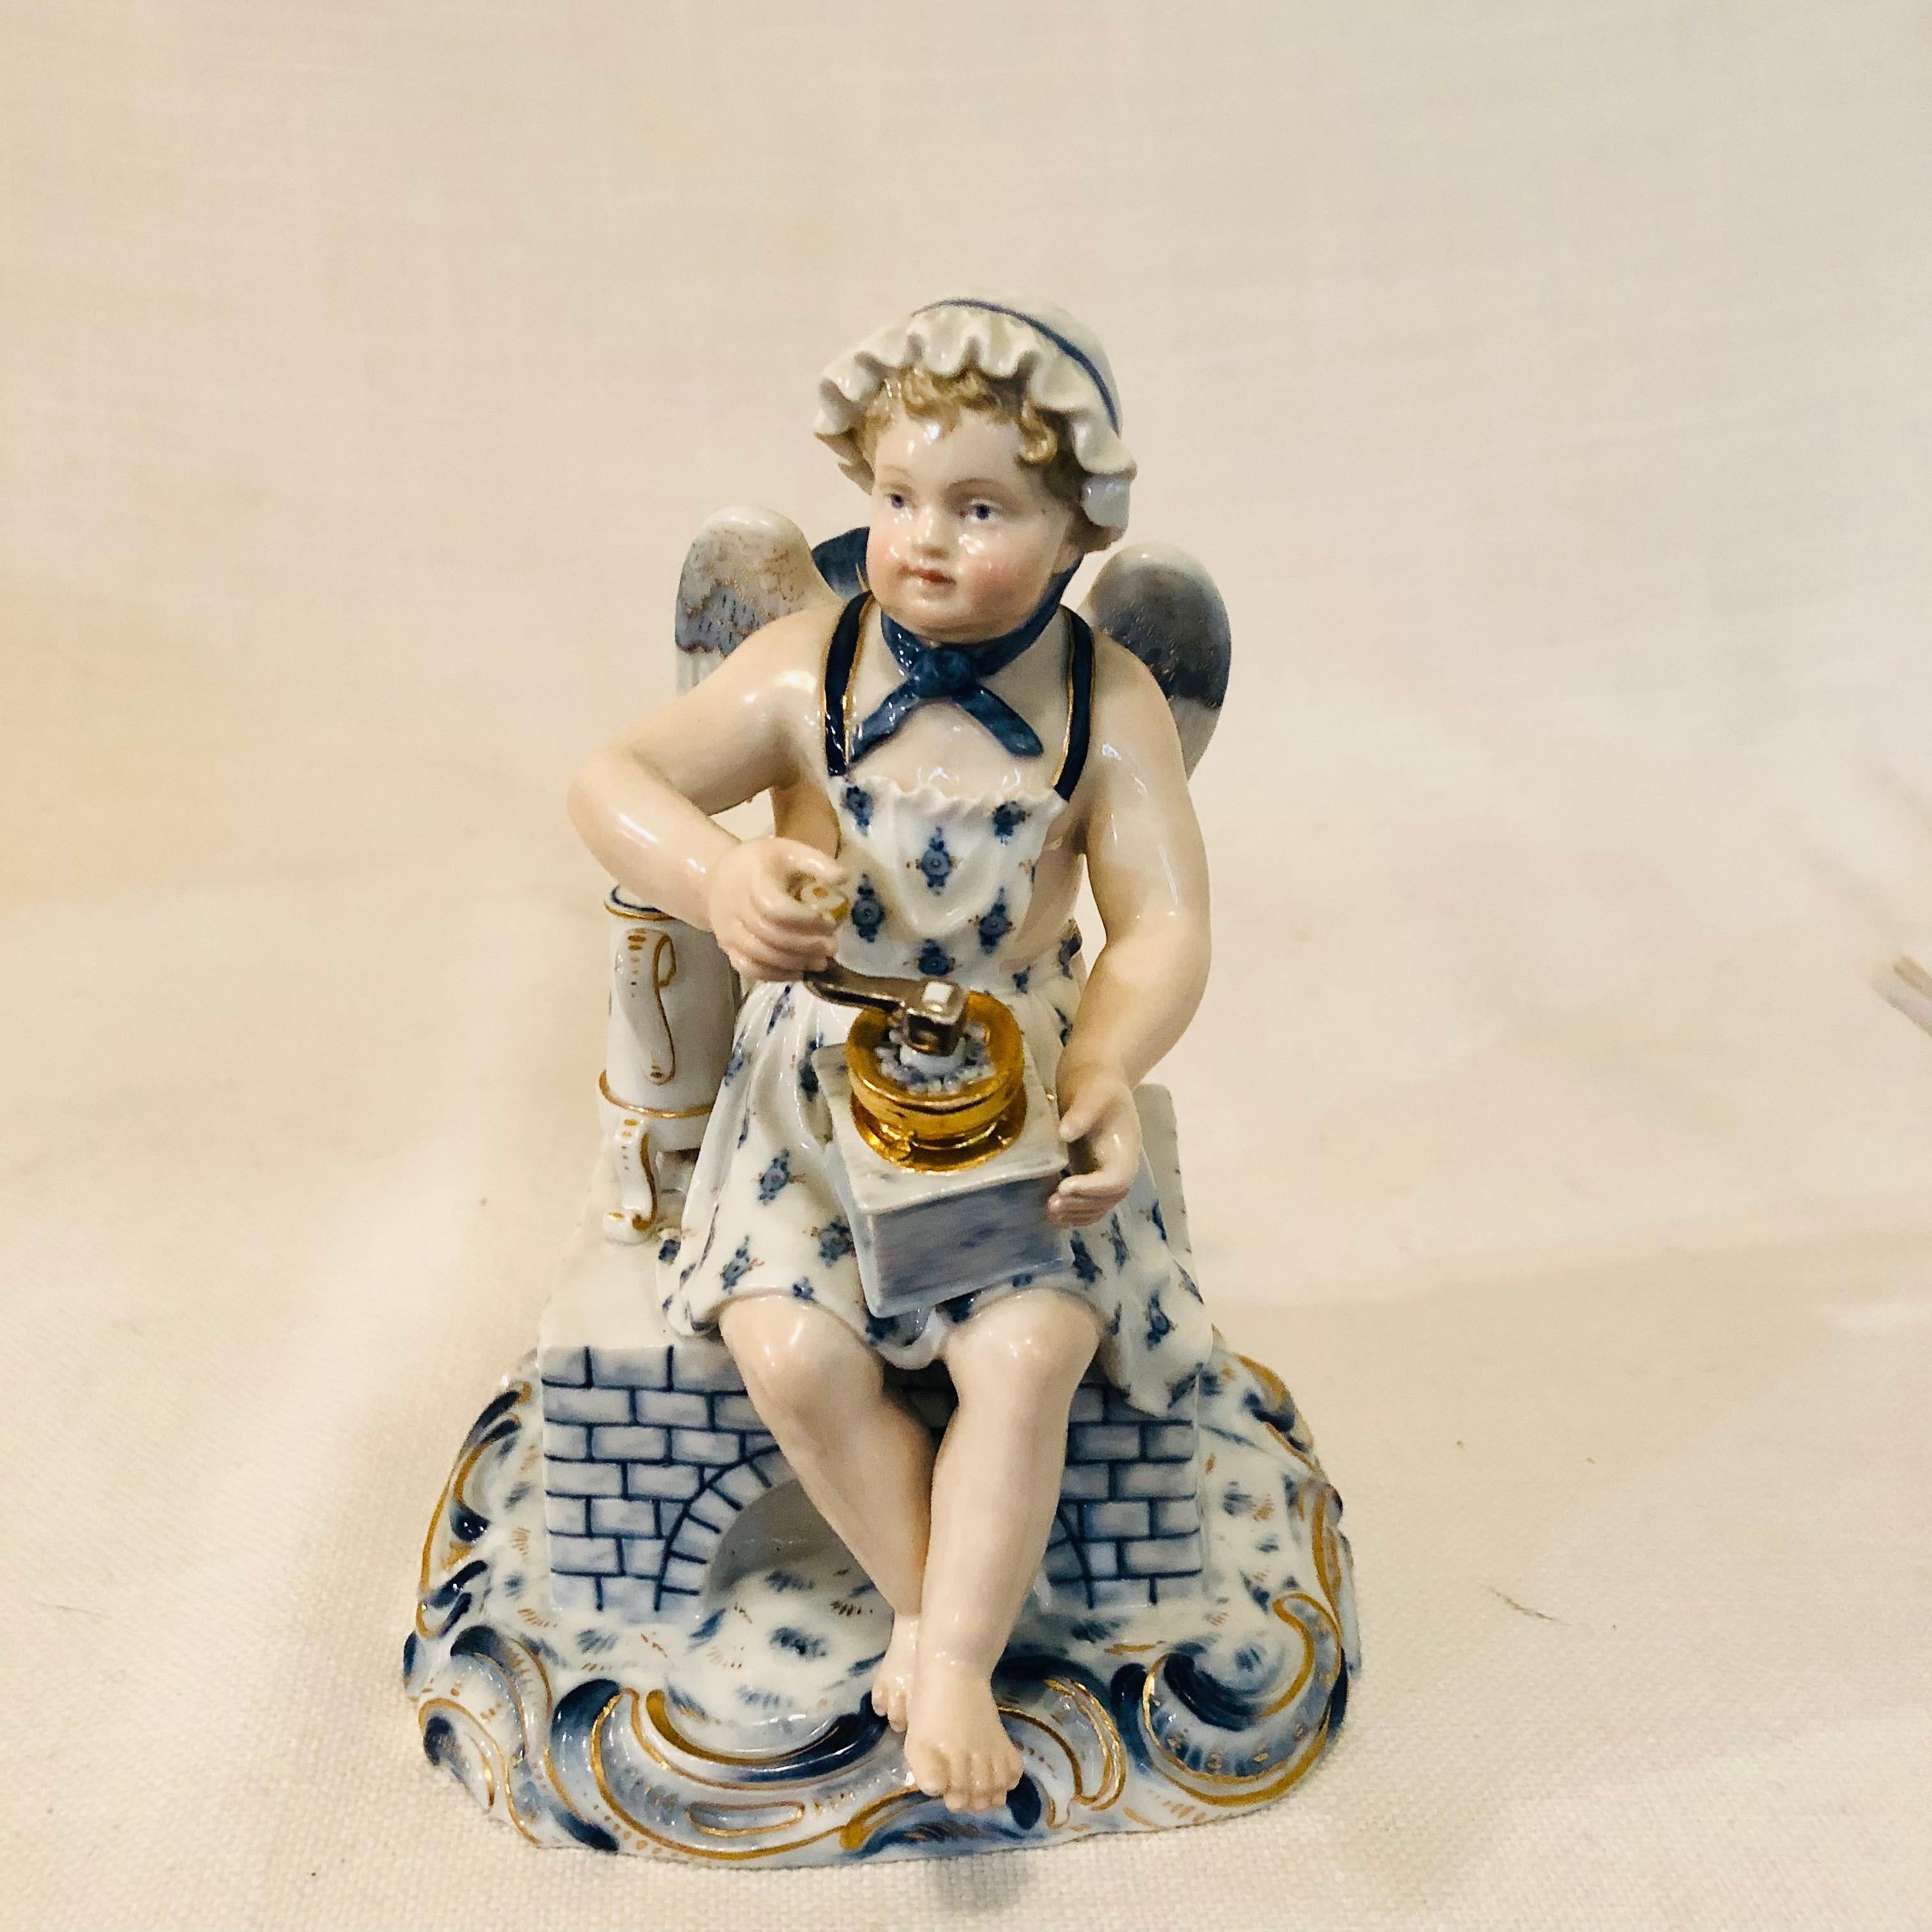 This is a very charming antique Meissen figurine of a boy angel with wings sitting on his stove grounding coffee to put in his coffee pot. The figurine is dark blue cobalt and white. It is in amazingly good antique condition. If you are either a